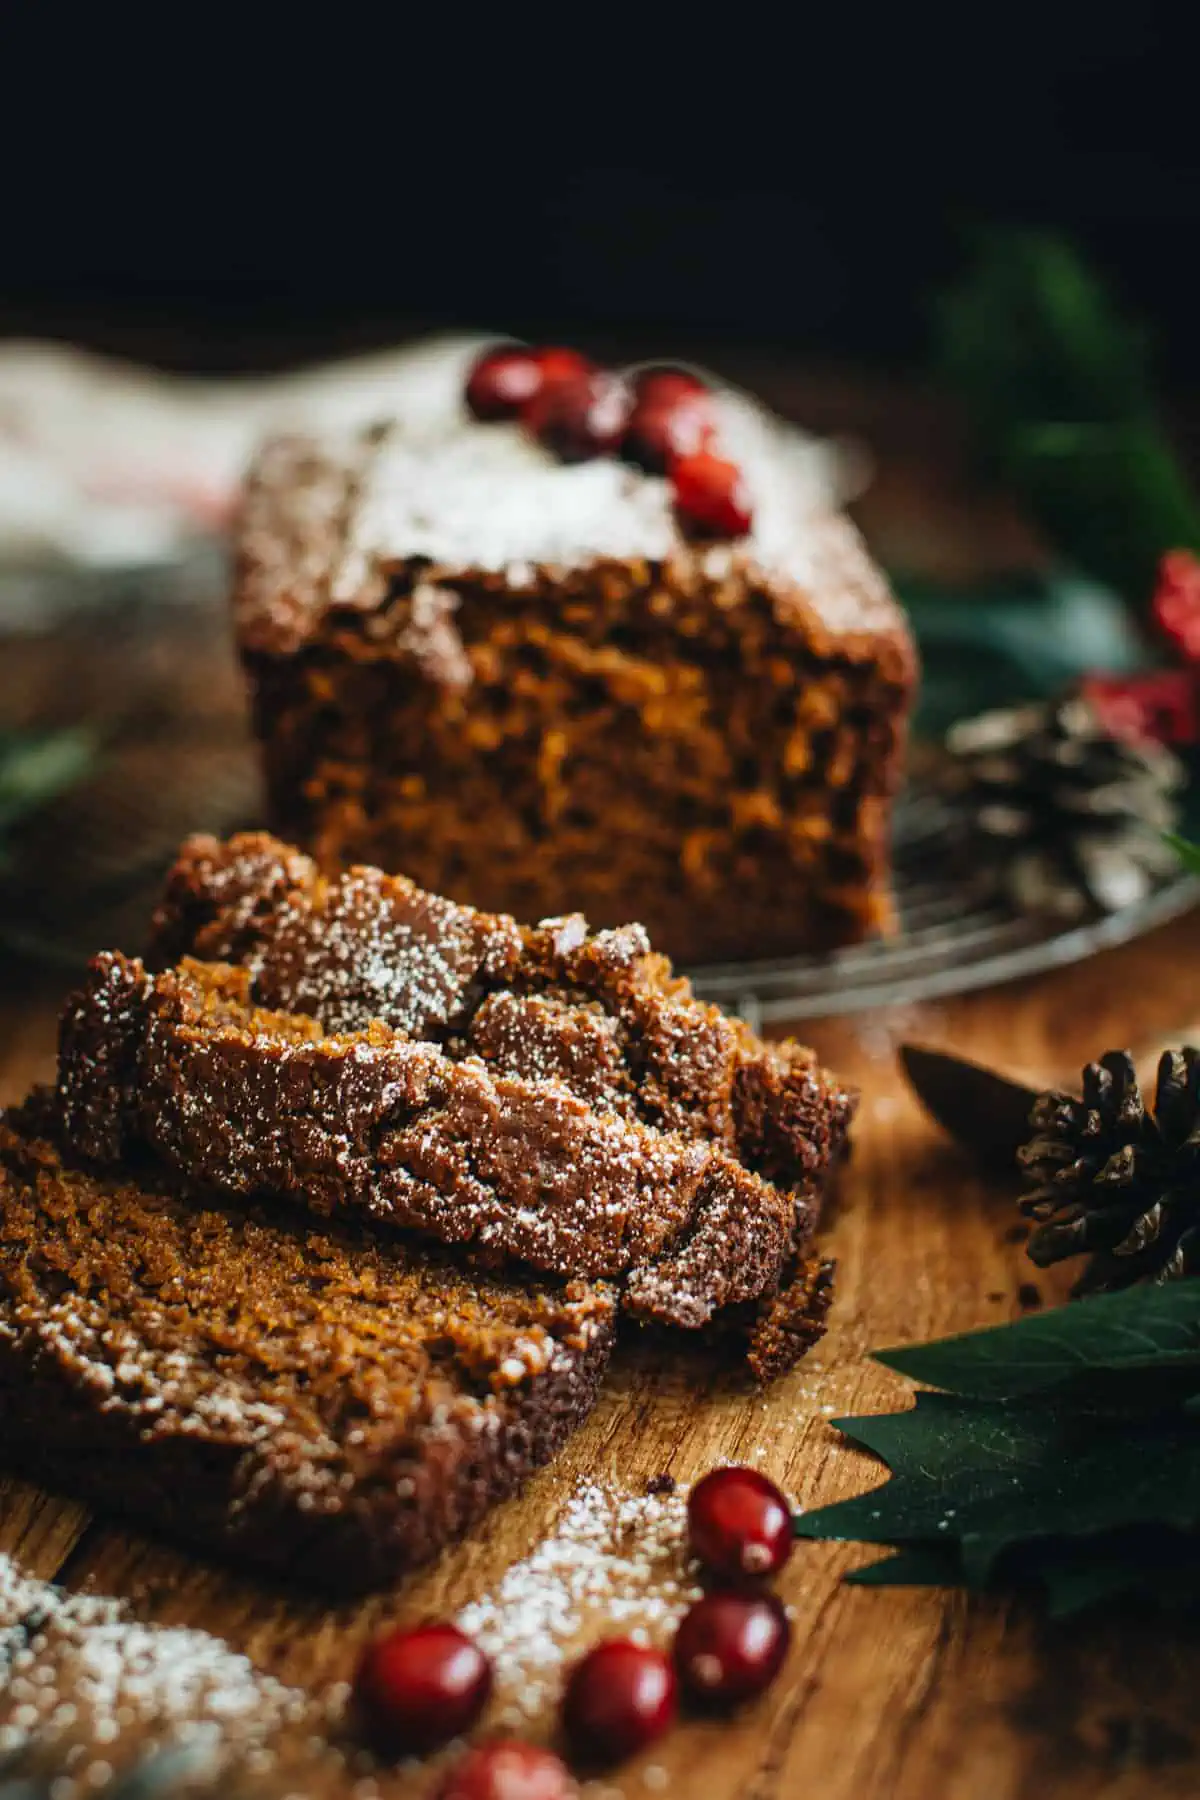 Gingerbread loaf dusted with powdered sugar on a round wire rack with three slices cut from the front. Christmas greenery around the slices and loaf as well as fresh cranberries.